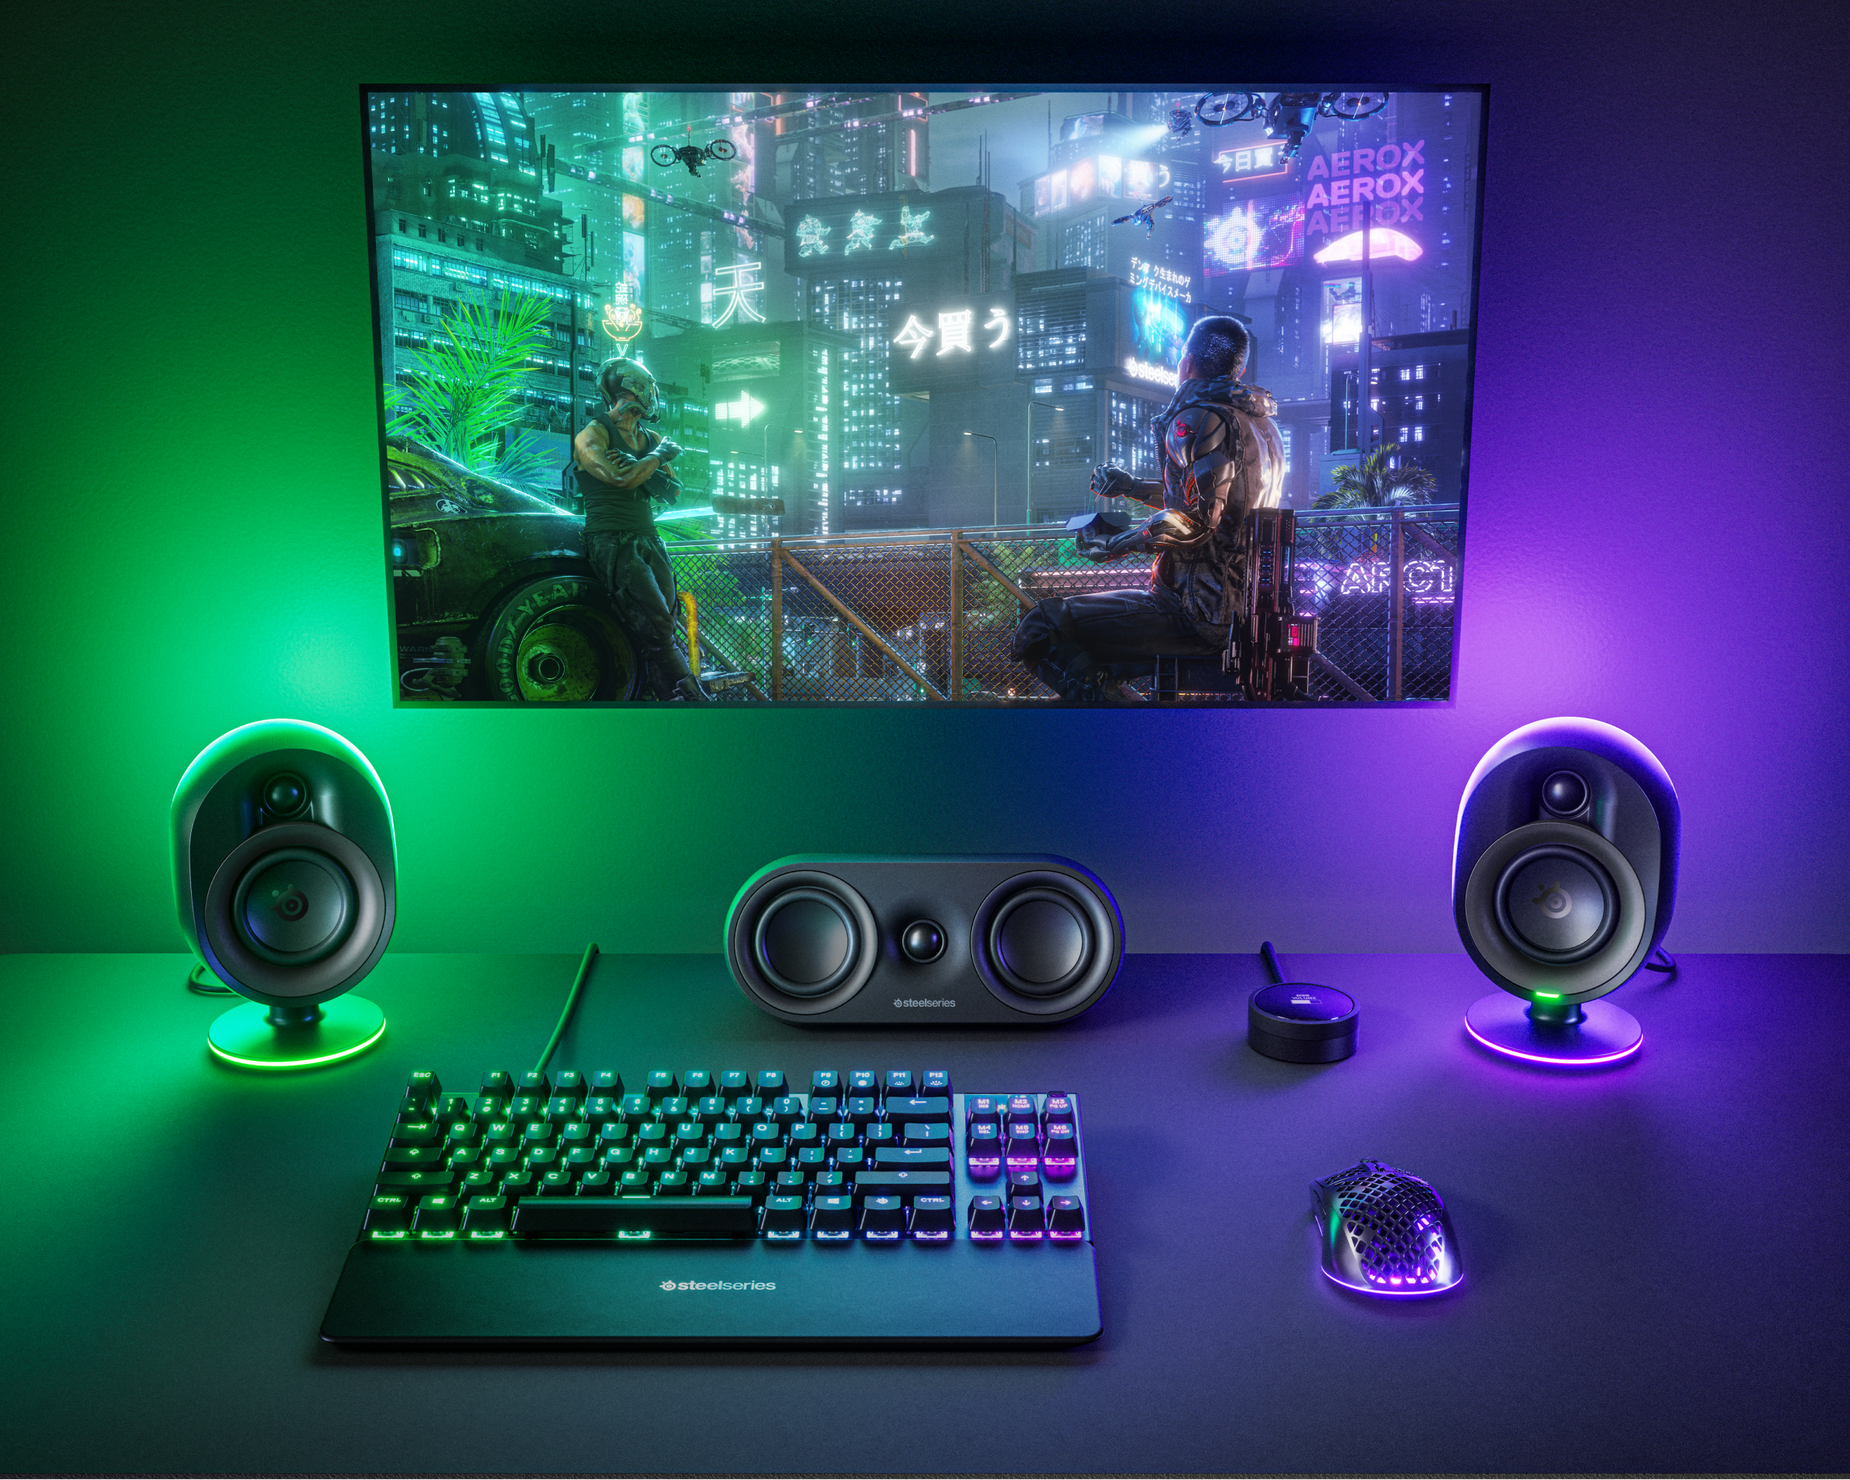 
 A desktop setup complete with a keyboard, mouse, and Arena 9 speakers lit up in moody green and purple RGB lighting.
 